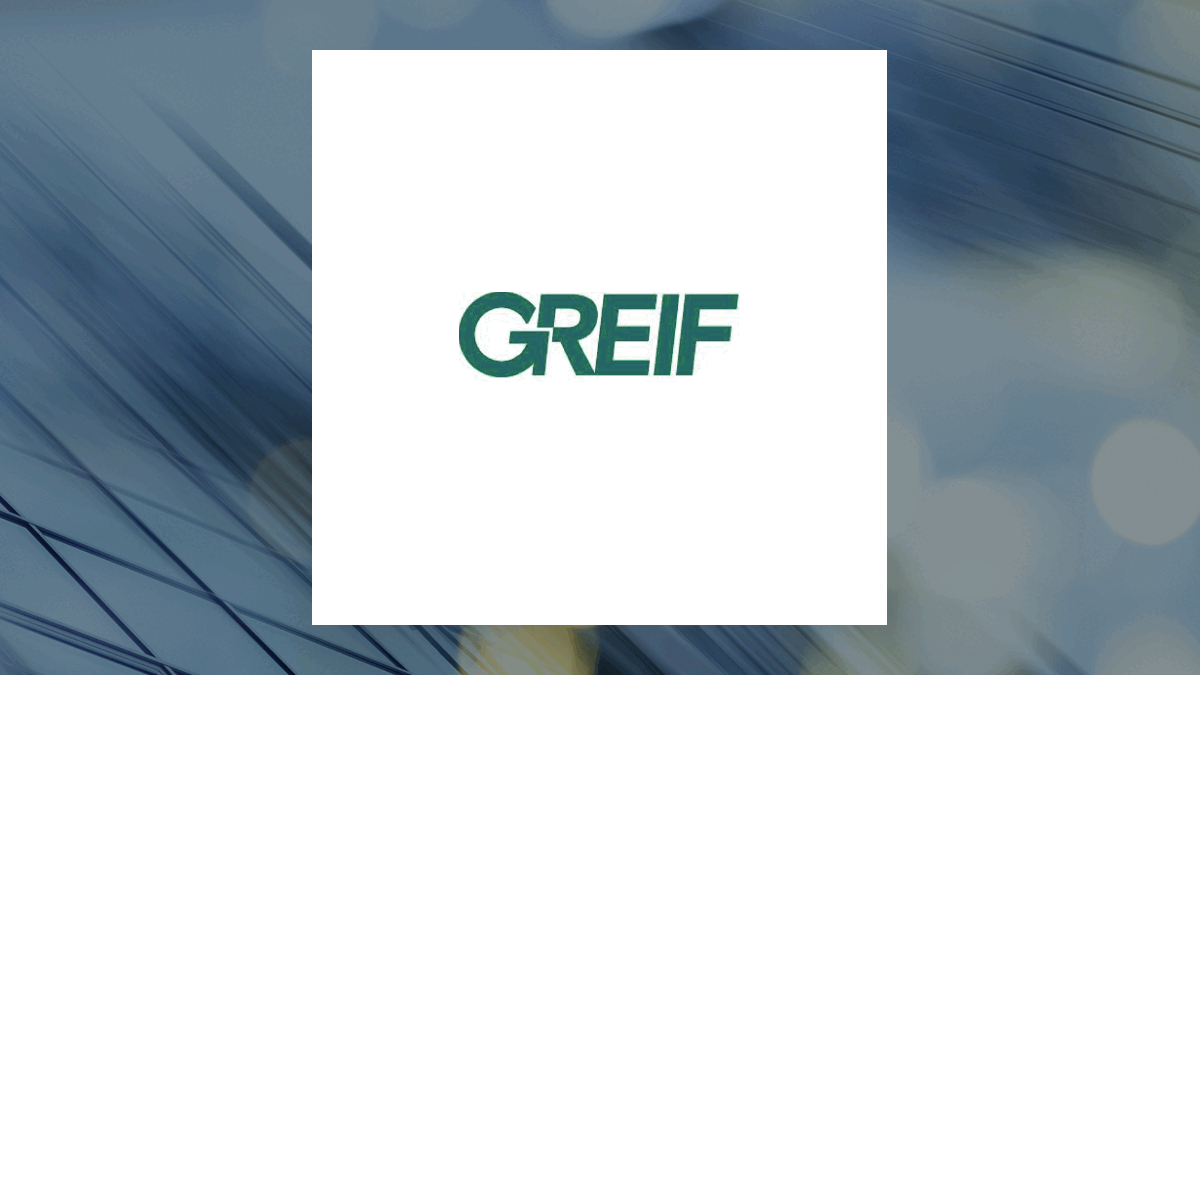 Greif logo with Industrial Products background